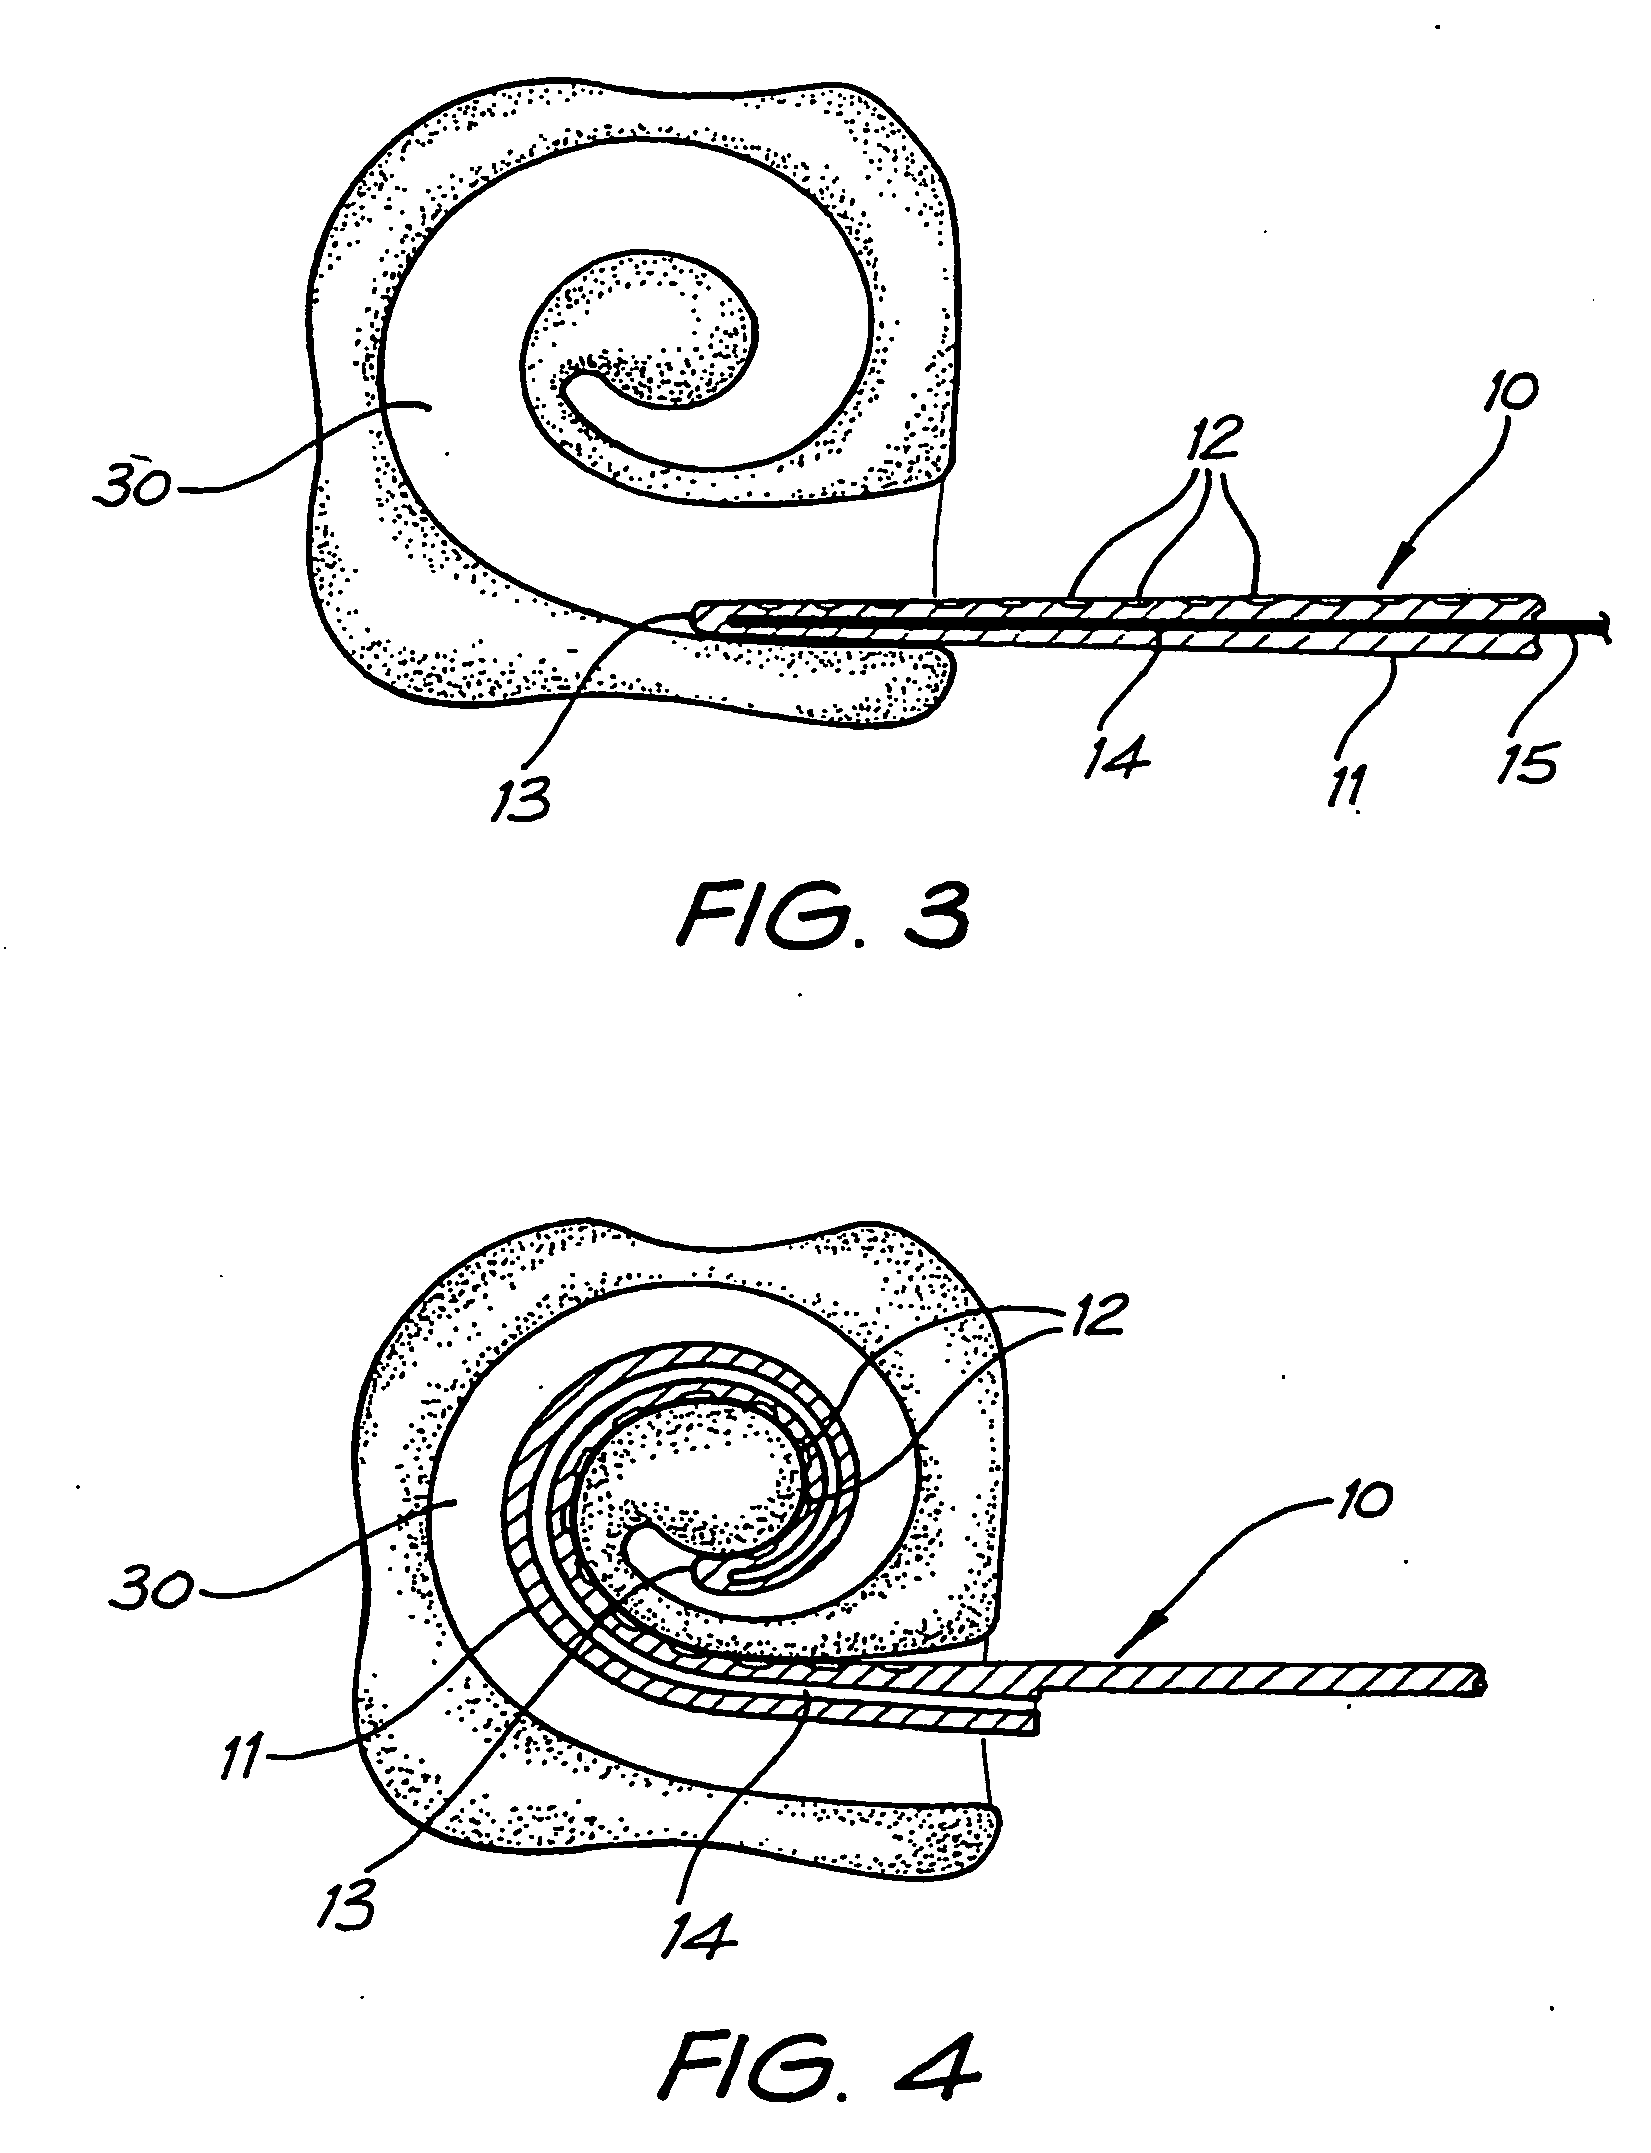 Cochlear implant electrode array